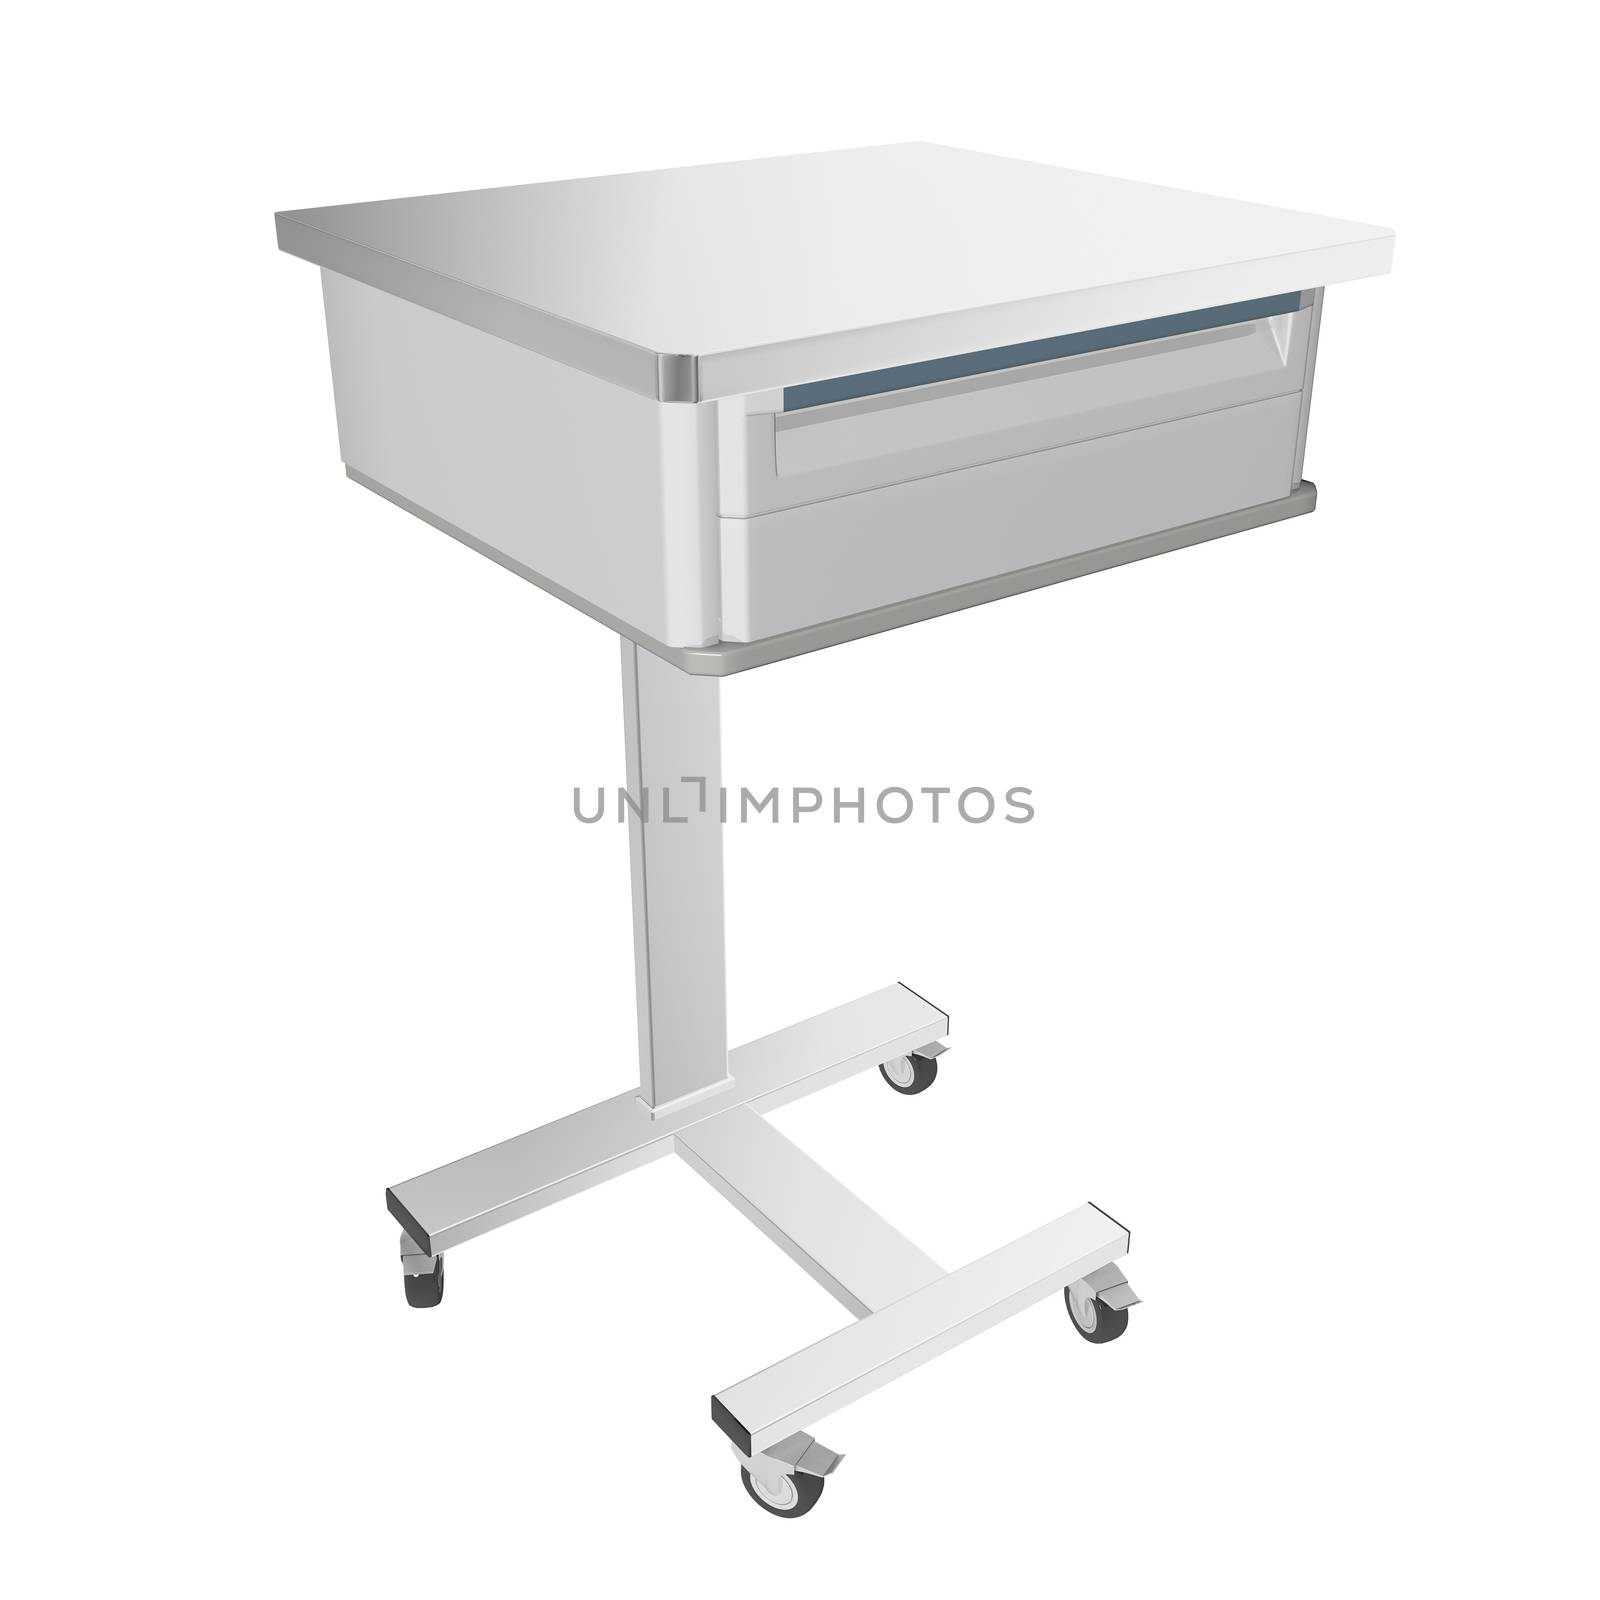 Mobile stainless metal medical over bed table with drawer, 3d illustration, isolated against a white background